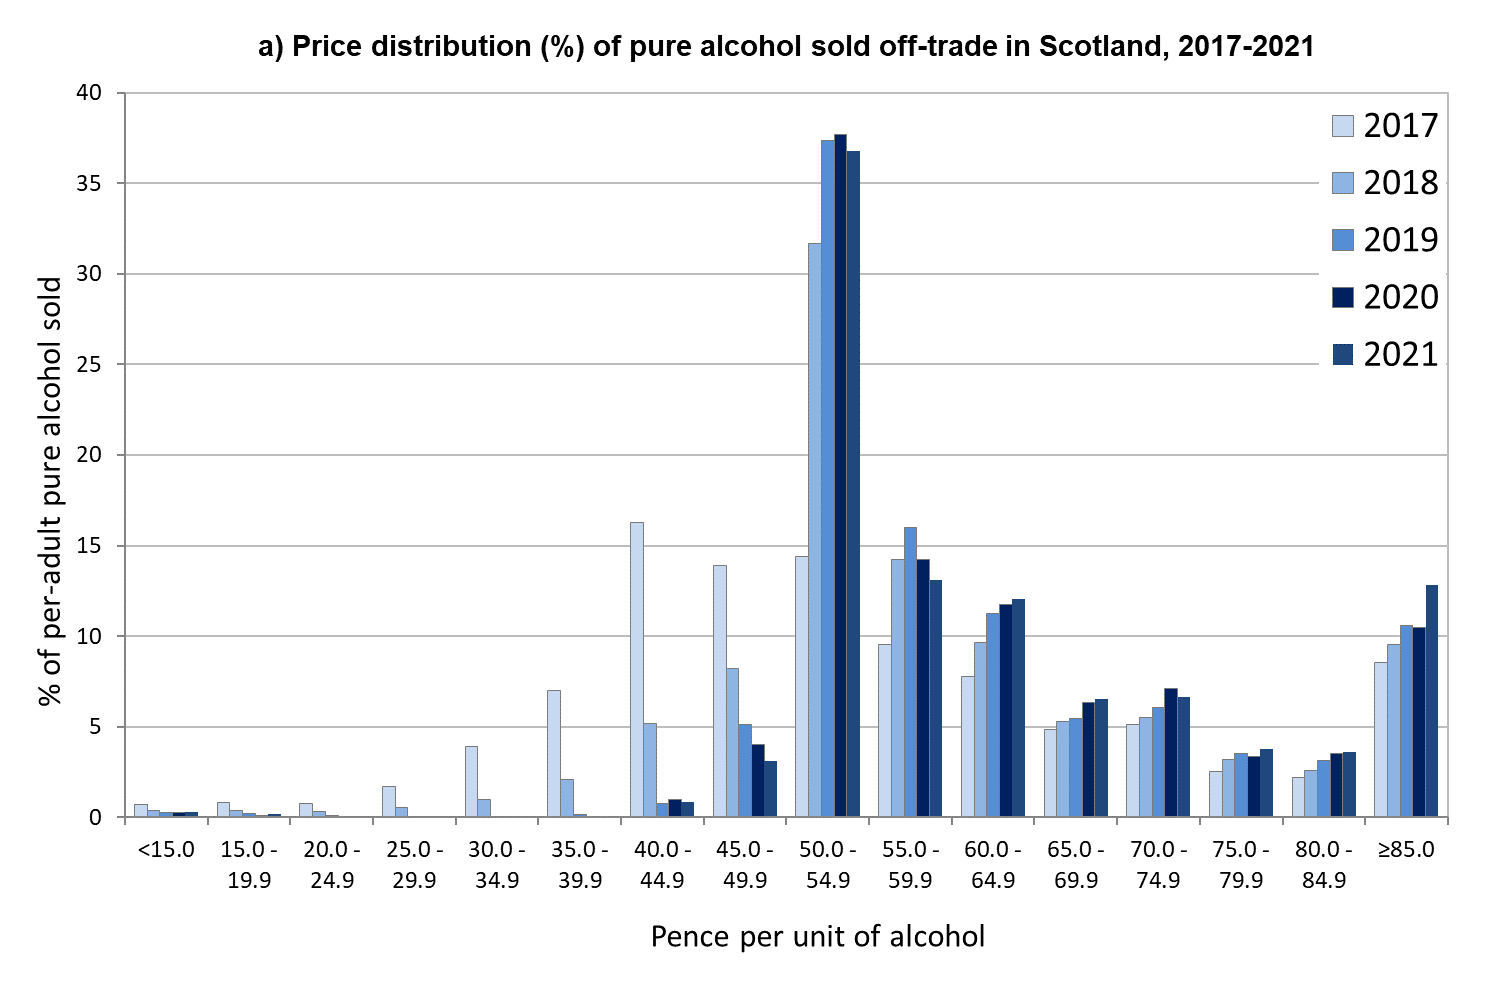 Shows the price distribution of alcohol sales (by volume) in the Scottish off-trade from 2017, prior to MUPs introduction, to 2021. It shows how the price distribution changed following the introduction of MUP, with a large shift in the share of products which had been below 50ppu in 2017 shifting to above that price point, making a large concentration of sales around that point.